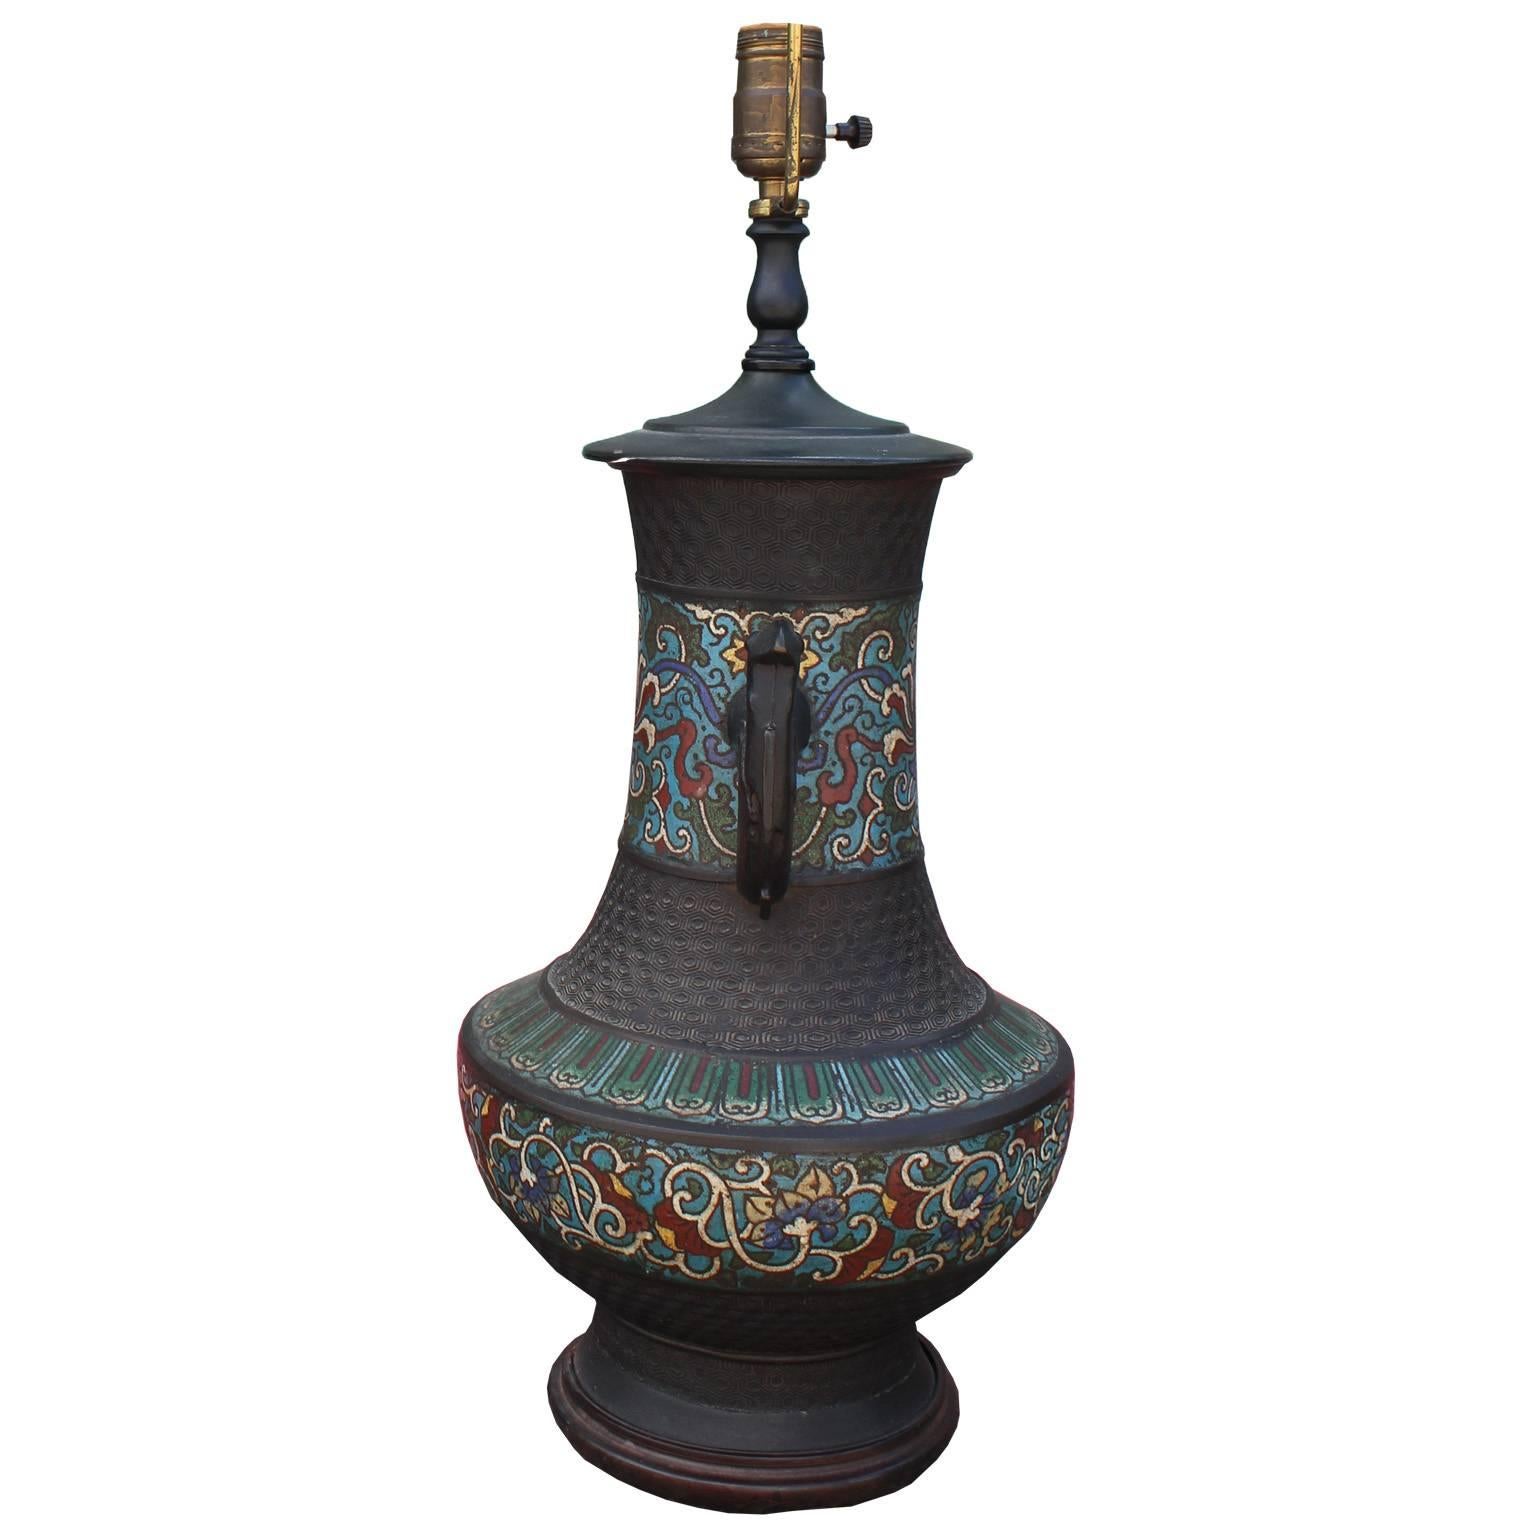 Striking Chinese Champlevé Cloisonné table lamp. Urn shaped bronze table lamp is enameled with a floral motif in turquoise, red, green, blue, and white. Figural handles and textured bronze finish the piece. Excellent craftsmanship.